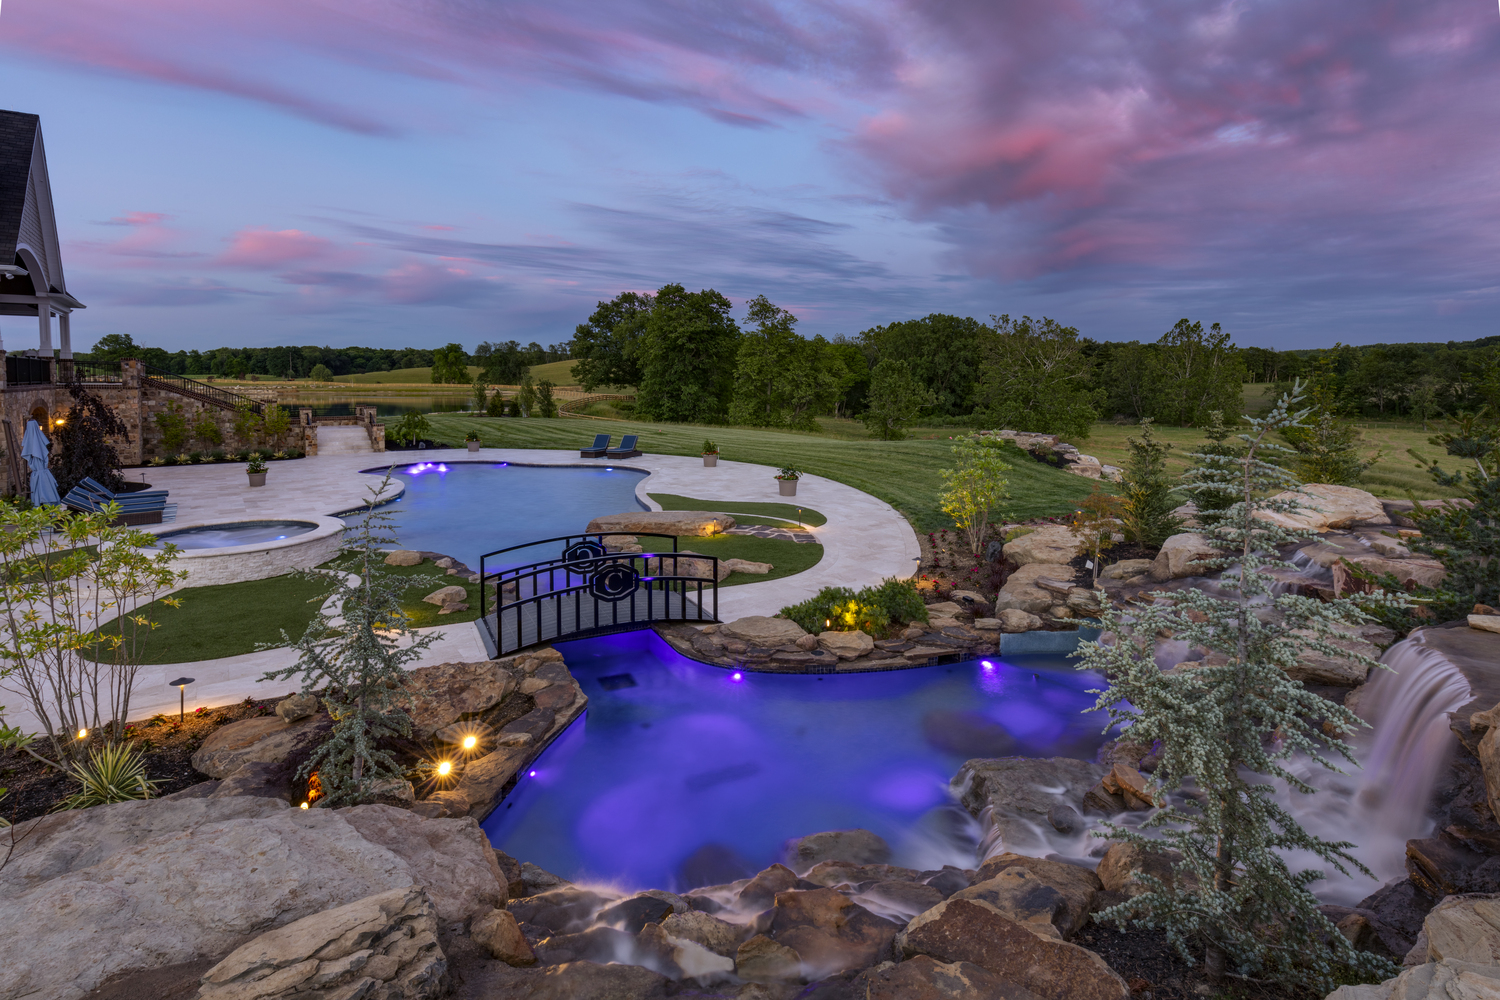 Freeform pool installed with a natural stone waterfall.